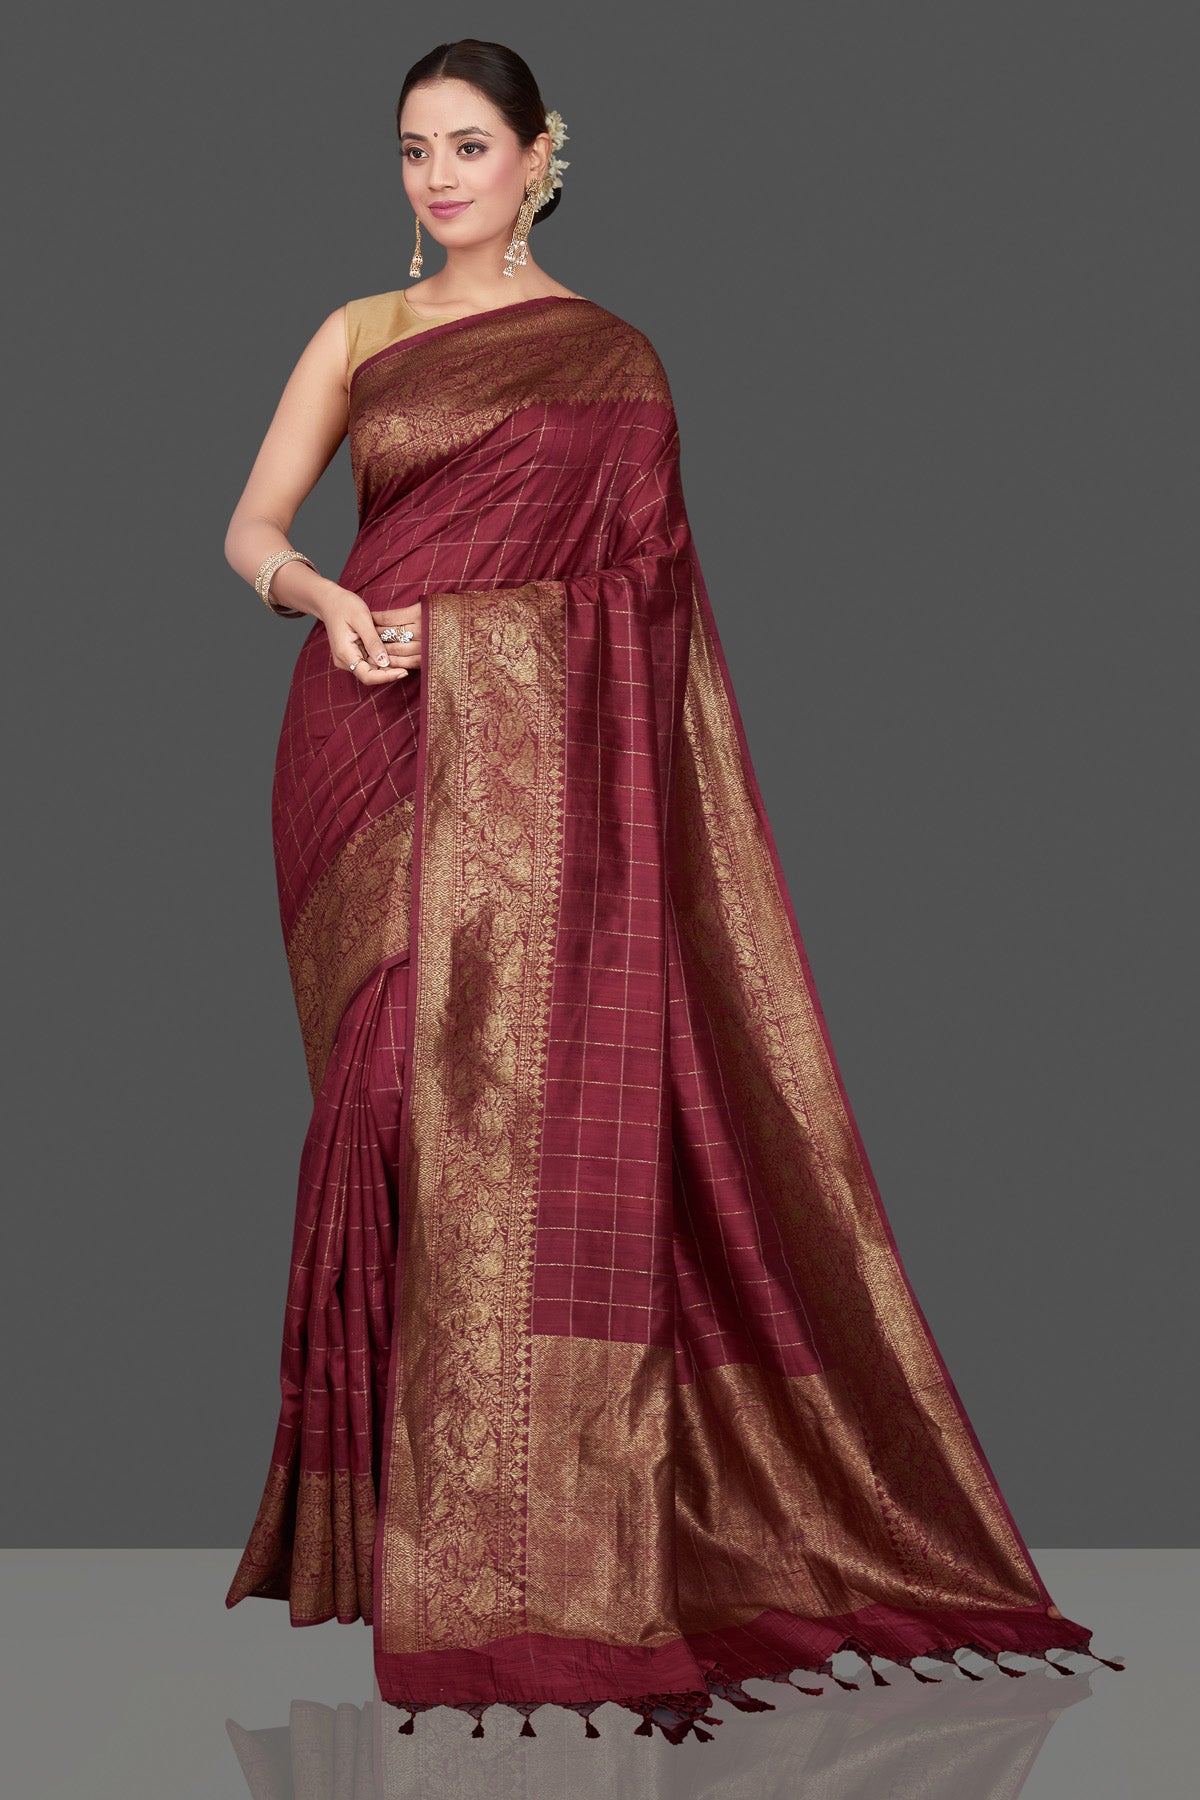 Buy gorgeous plum check tussar Banarasi saree online in USA with antique zari border. Go for stunning Indian designer sarees, georgette sarees, handwoven saris, embroidered sarees for festive occasions and weddings from Pure Elegance Indian clothing store in USA.-full view